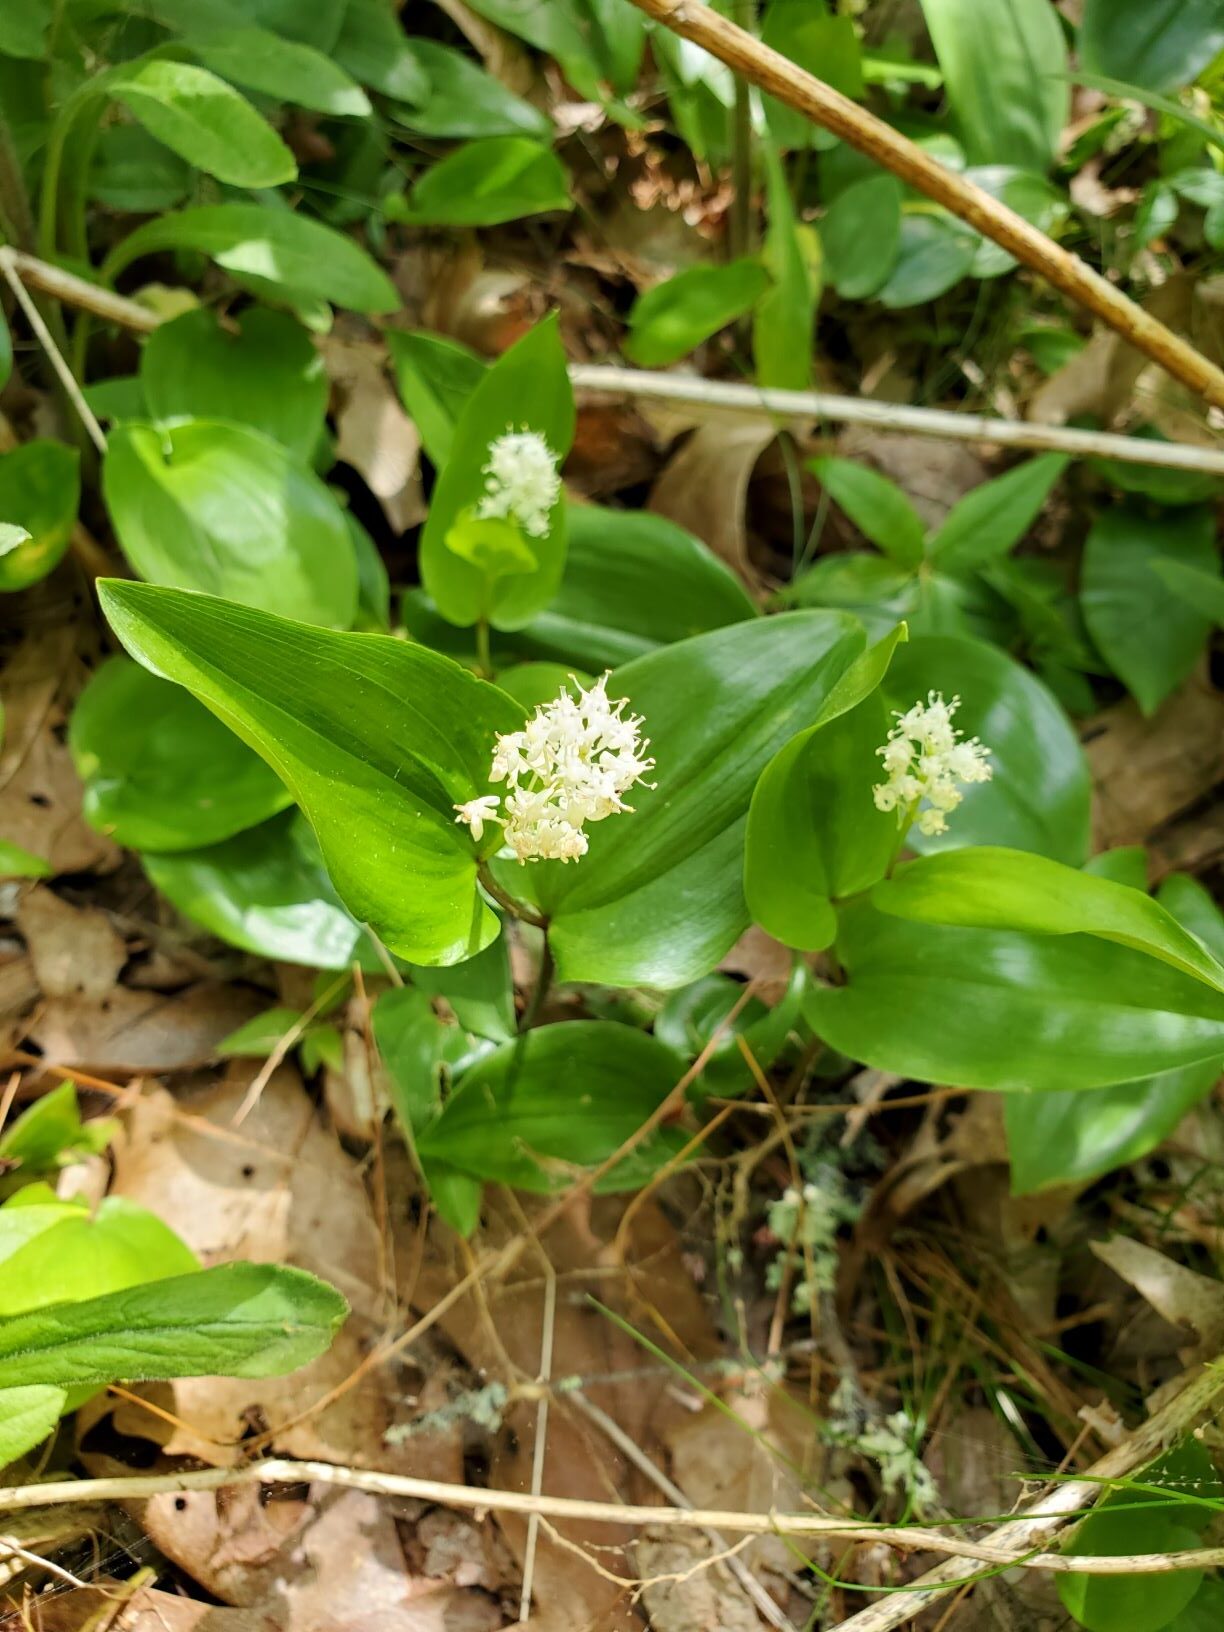 The Canada Mayflower and Local Plant ID